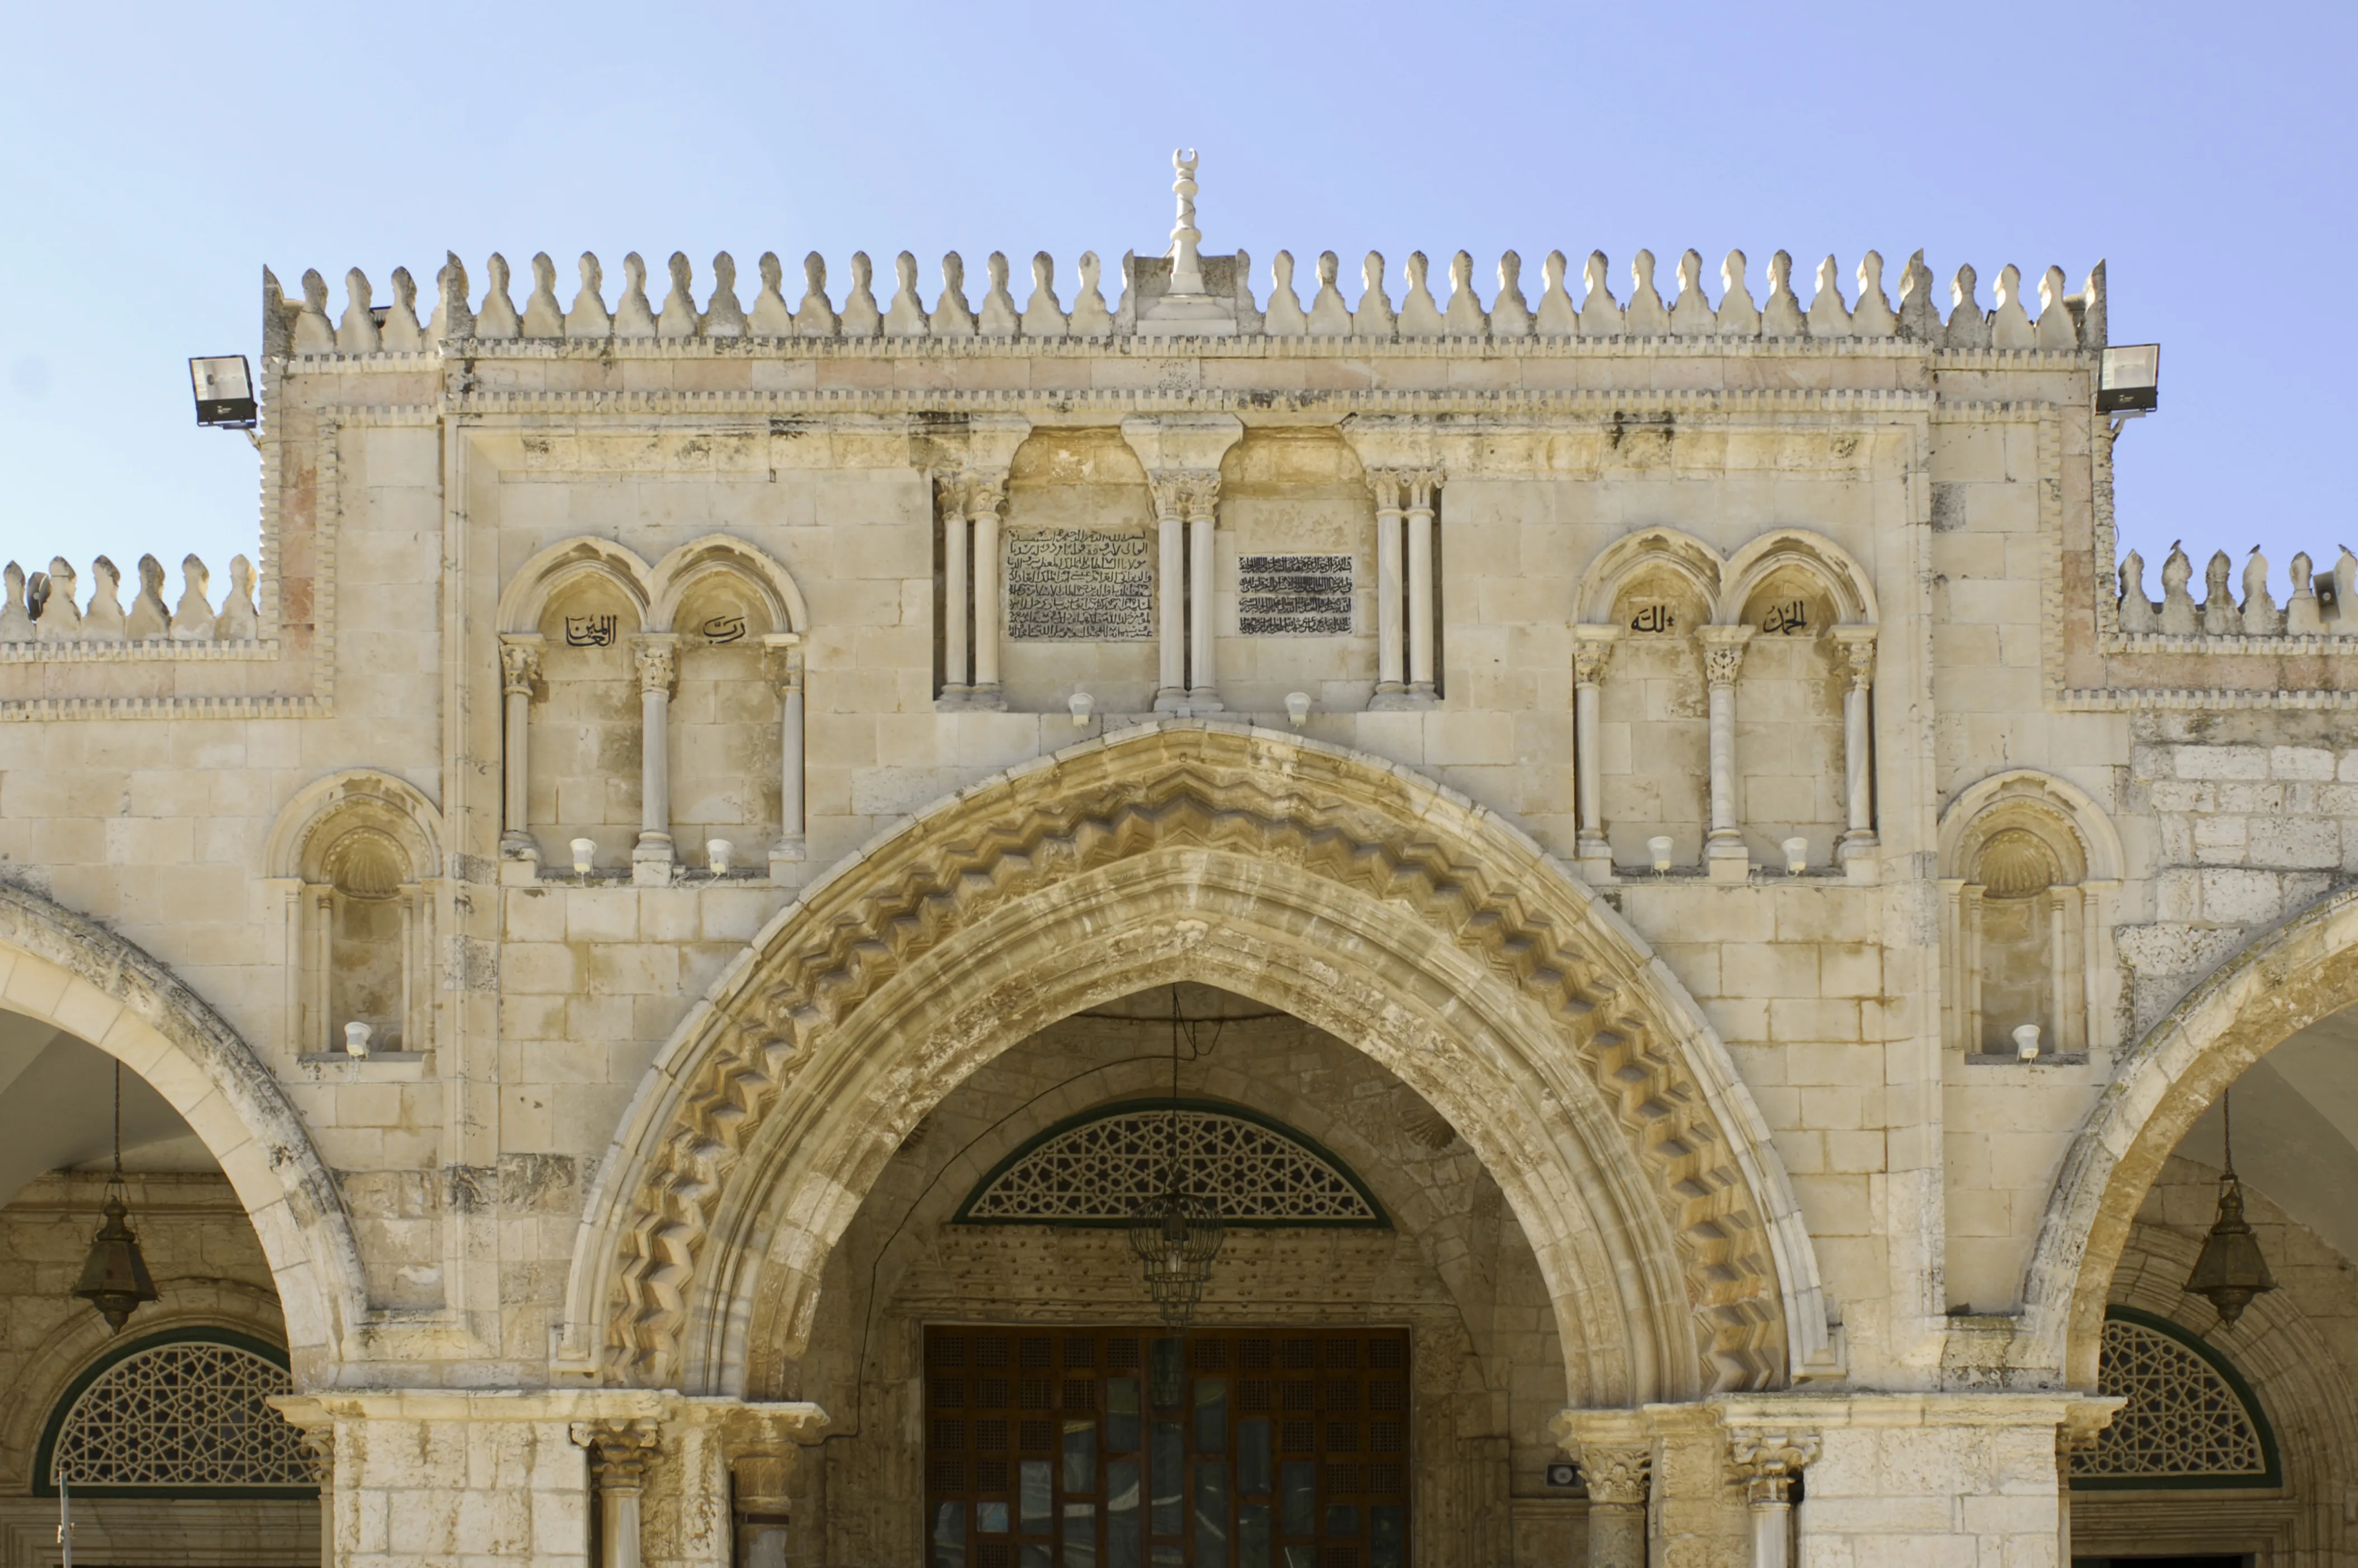 Jami al-Aqsa in Israel, Middle East | Architecture - Rated 4.3